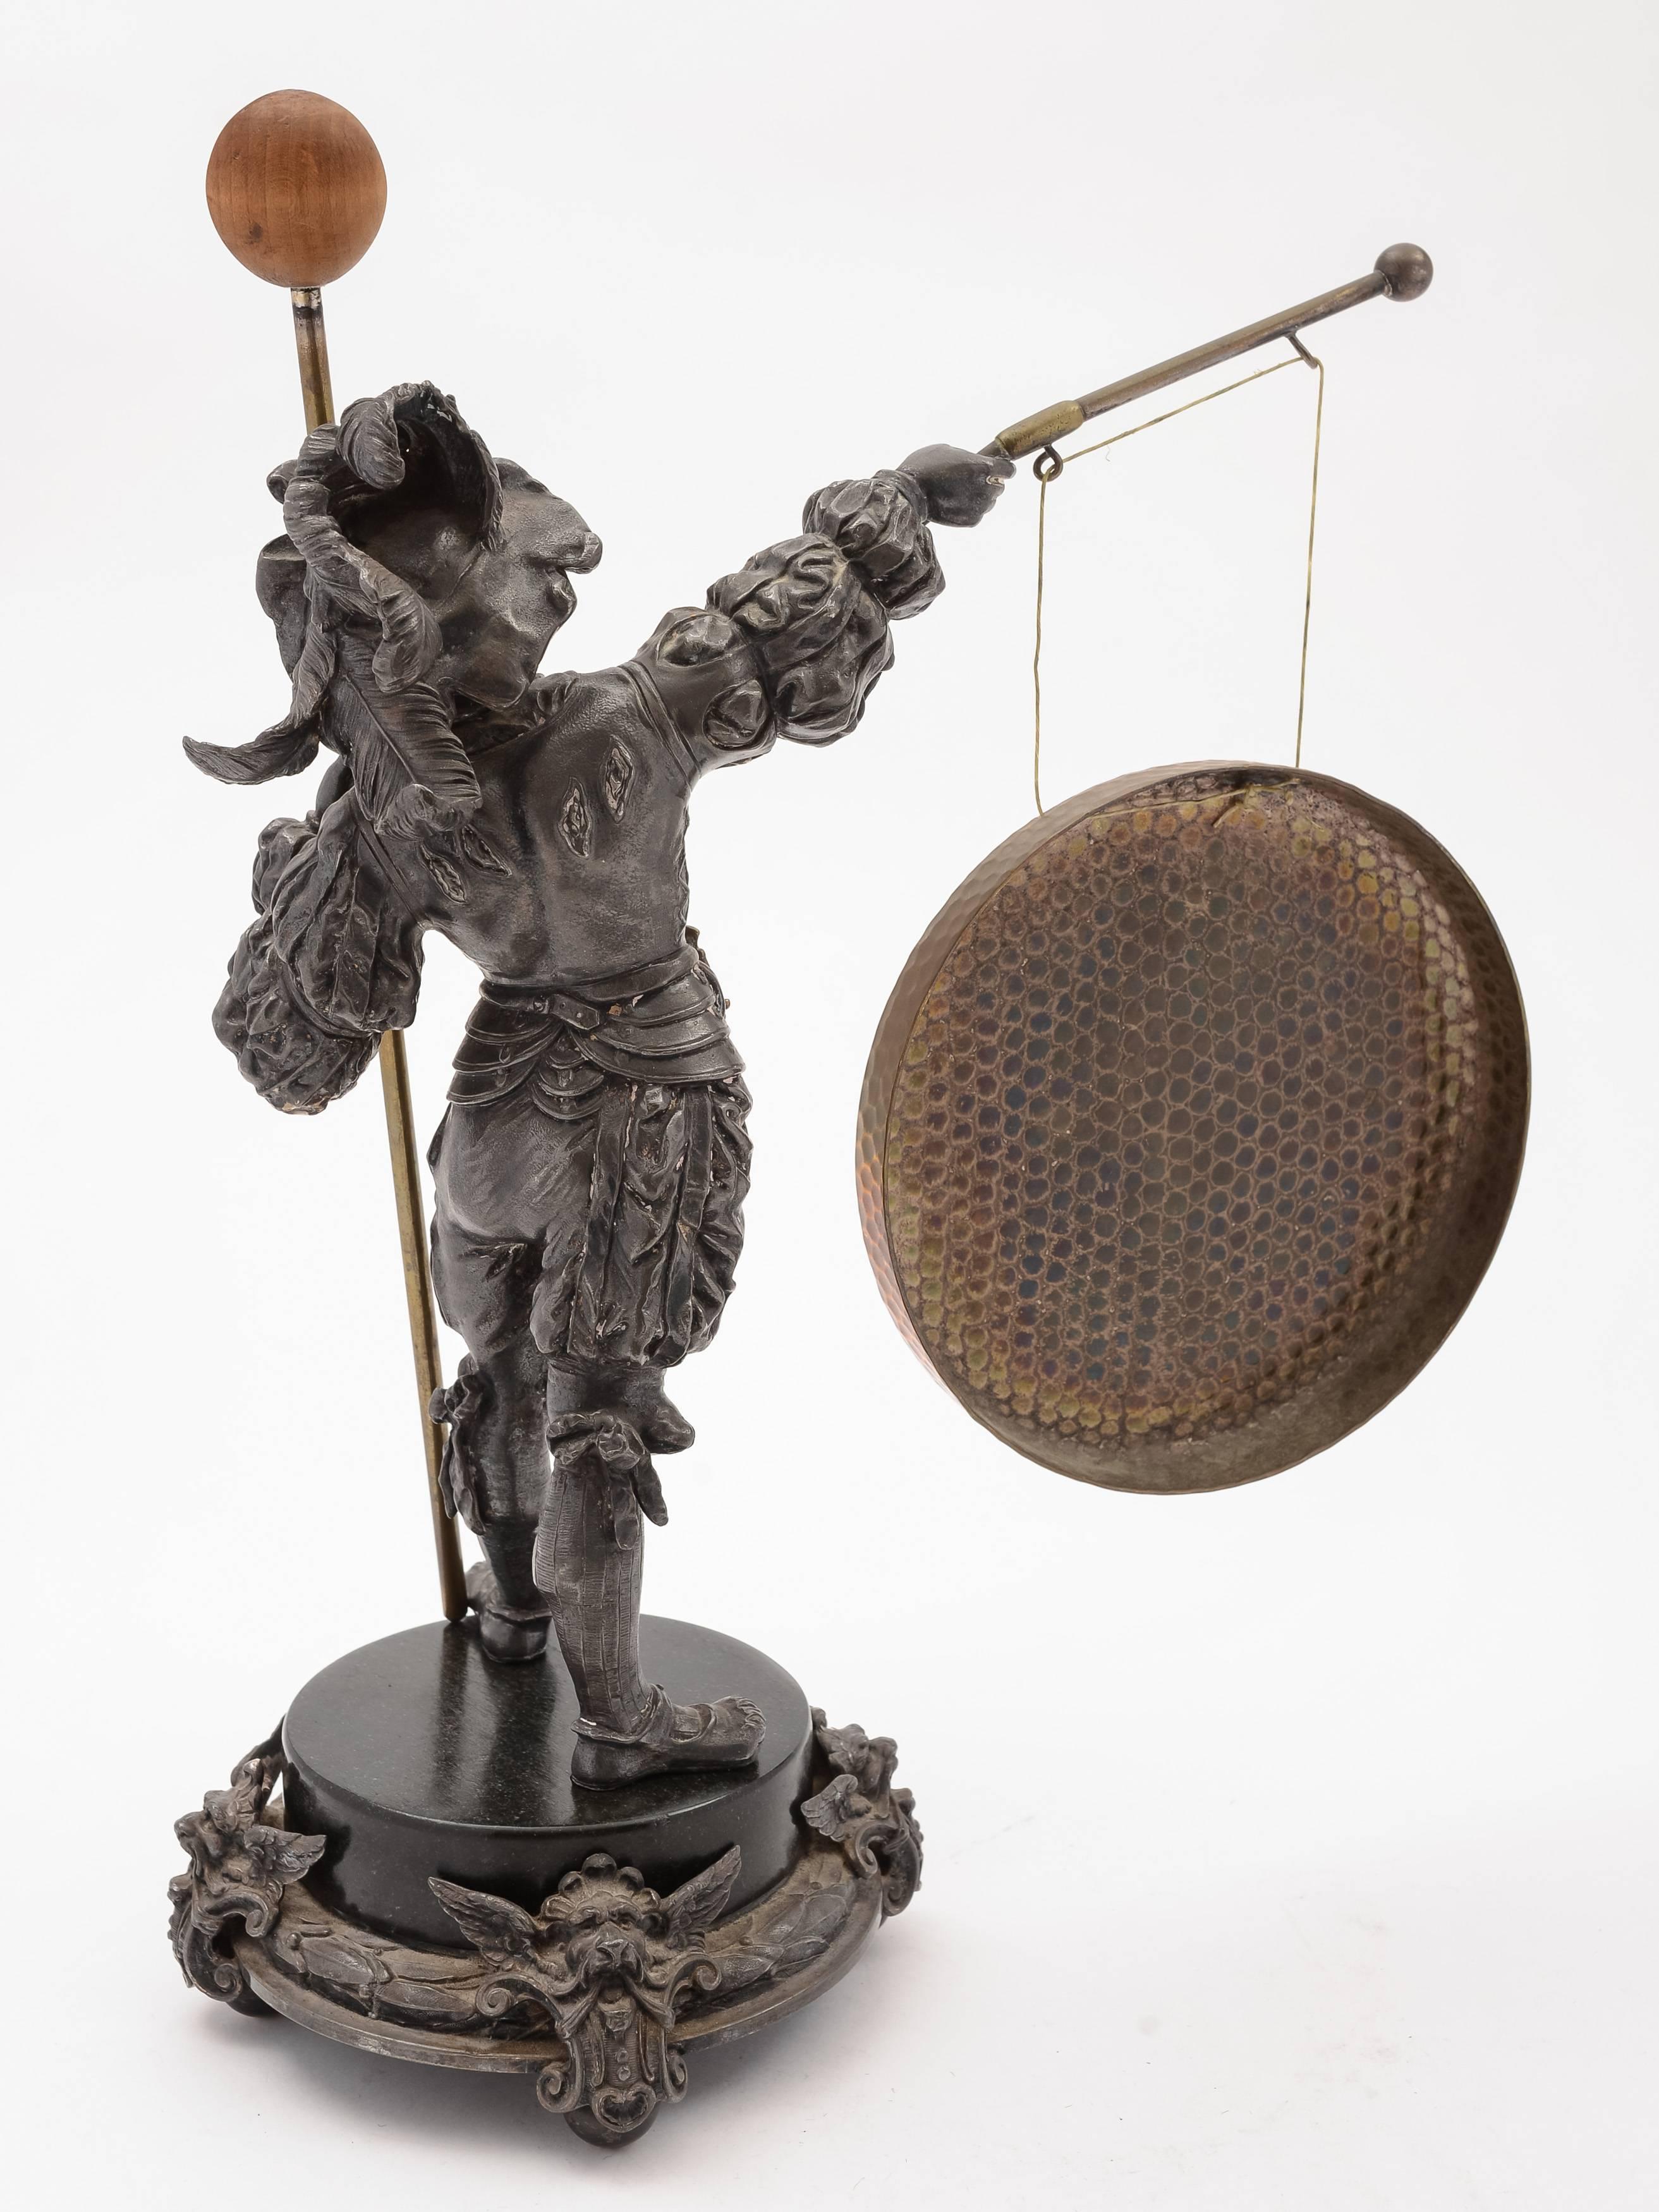 A fabulous WMF German spelter novelty dinner gong depicting military man in elaborate period costume holding brass striker and standing on ornate base with brass gong attached to gun, circa 1900. Has WMF mark to base.

 

Measurements:
Height